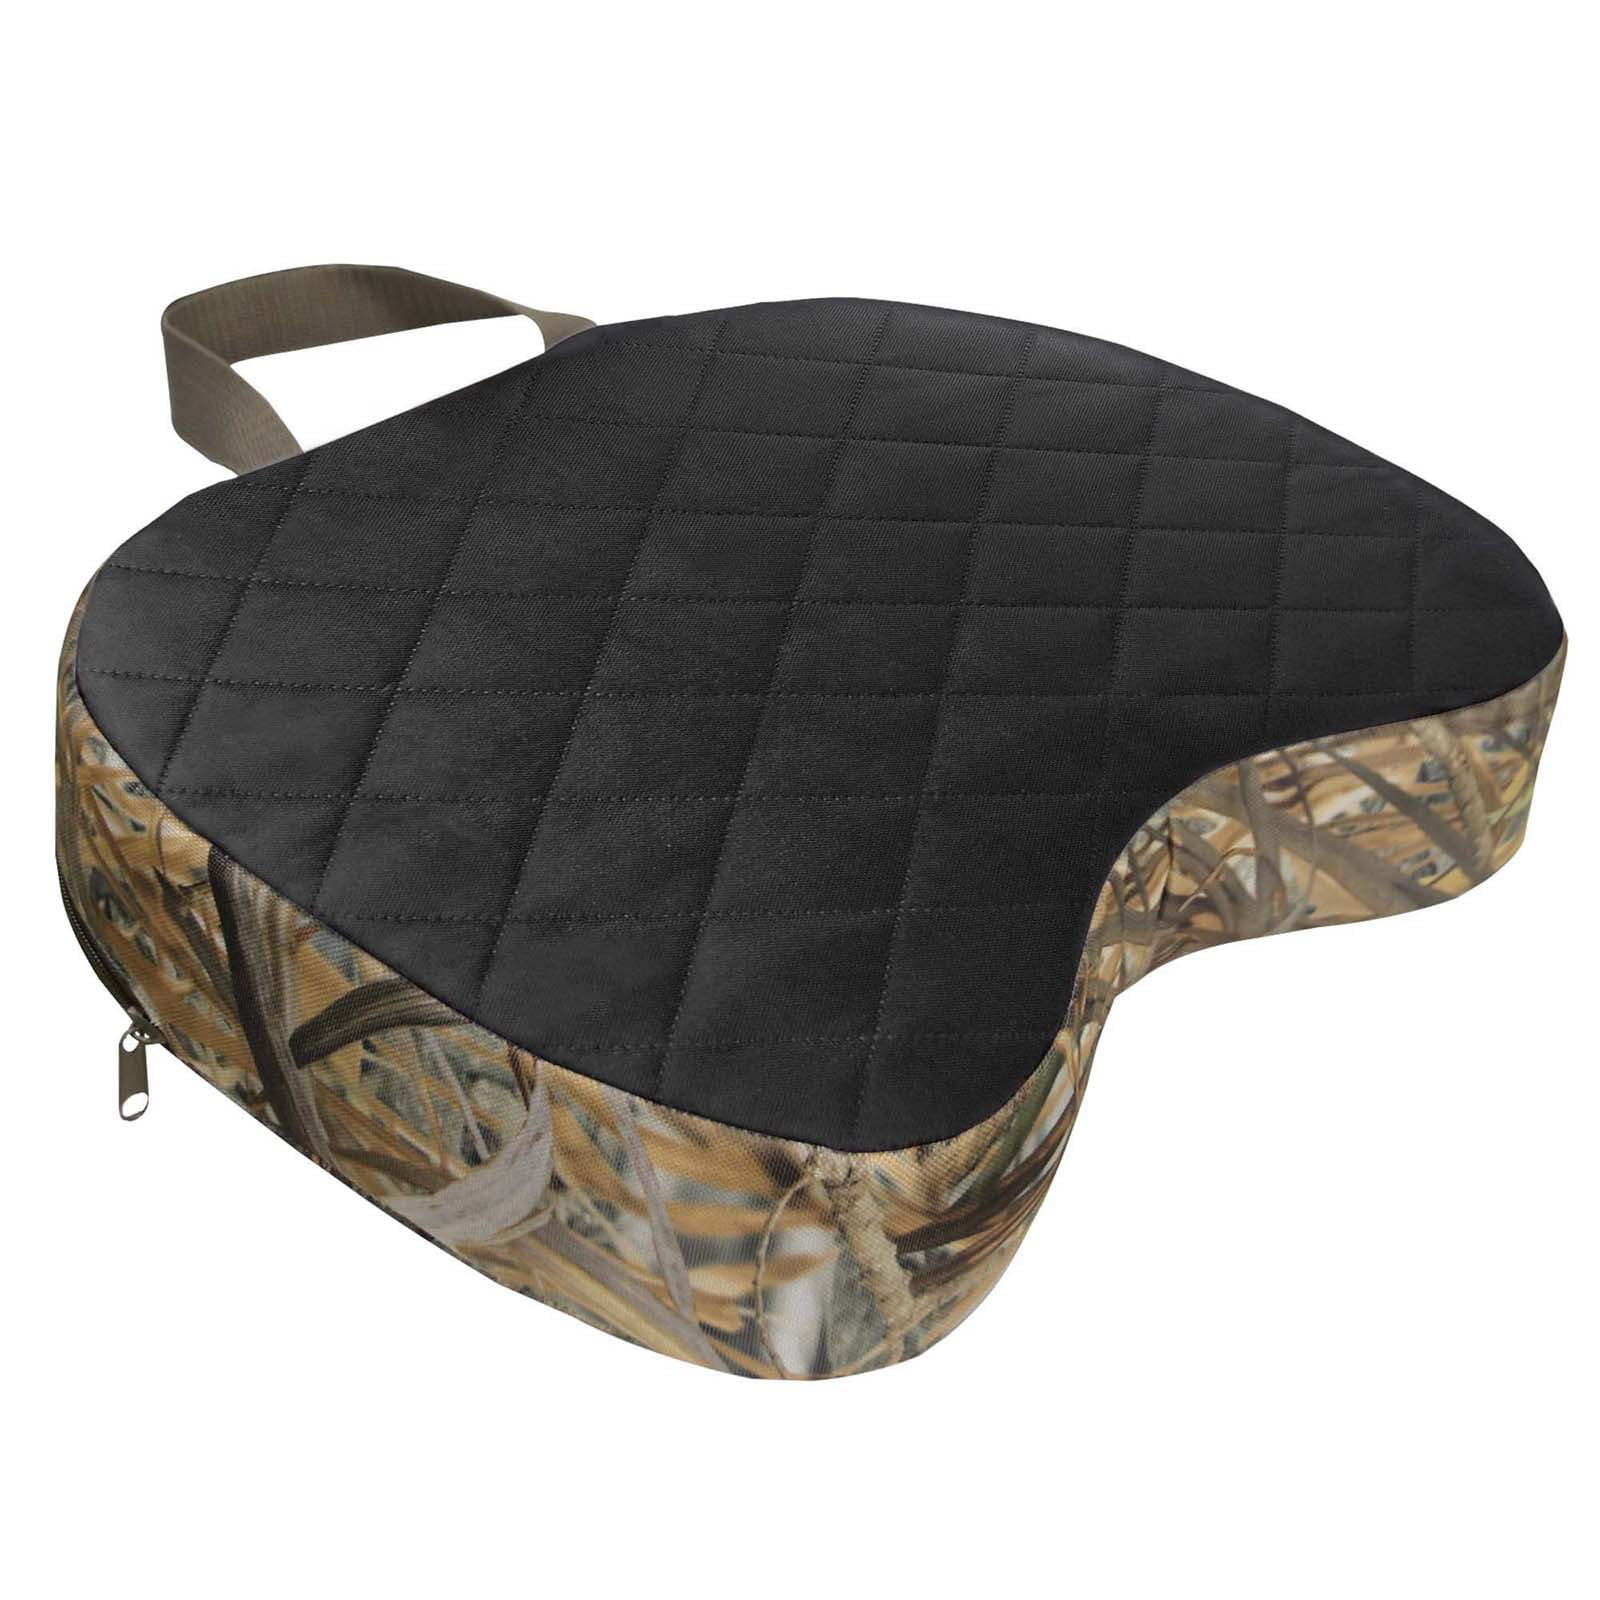 Hunting Seat Pad Portable Quilted Cotton Oxford Fabric Waterproof